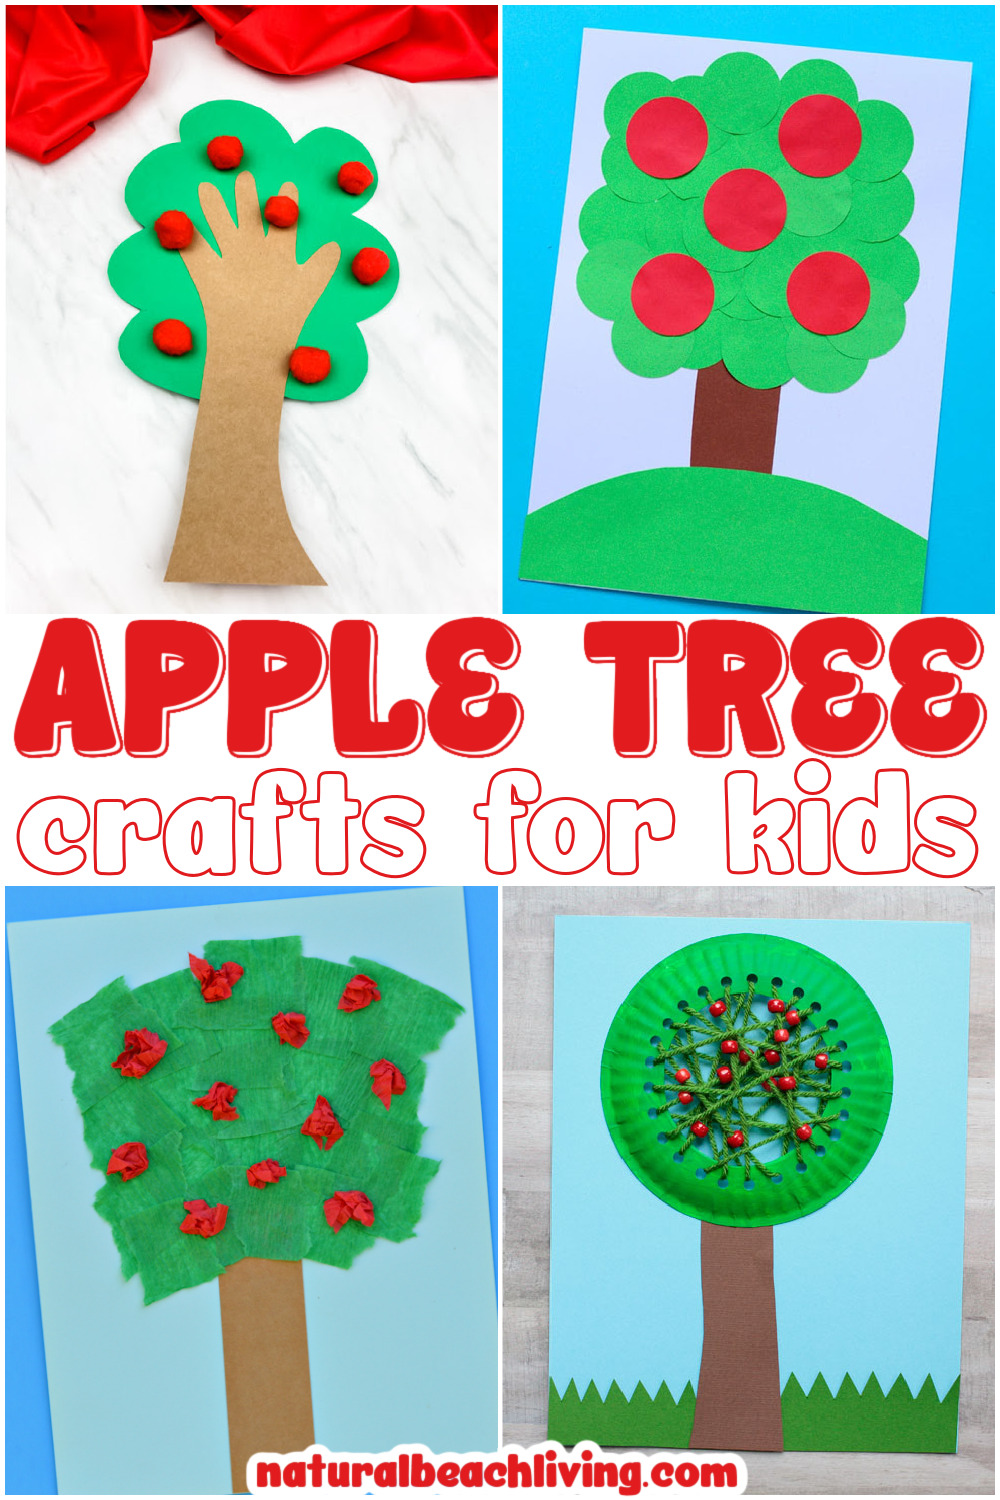 Apple trees are one of the best fall themes. Whether you're eating them, picking them, or crafting with them, everyone loves apples! Here are 16 apple tree crafts for kids to inspire you and your little ones this season. Apple Preschool Crafts